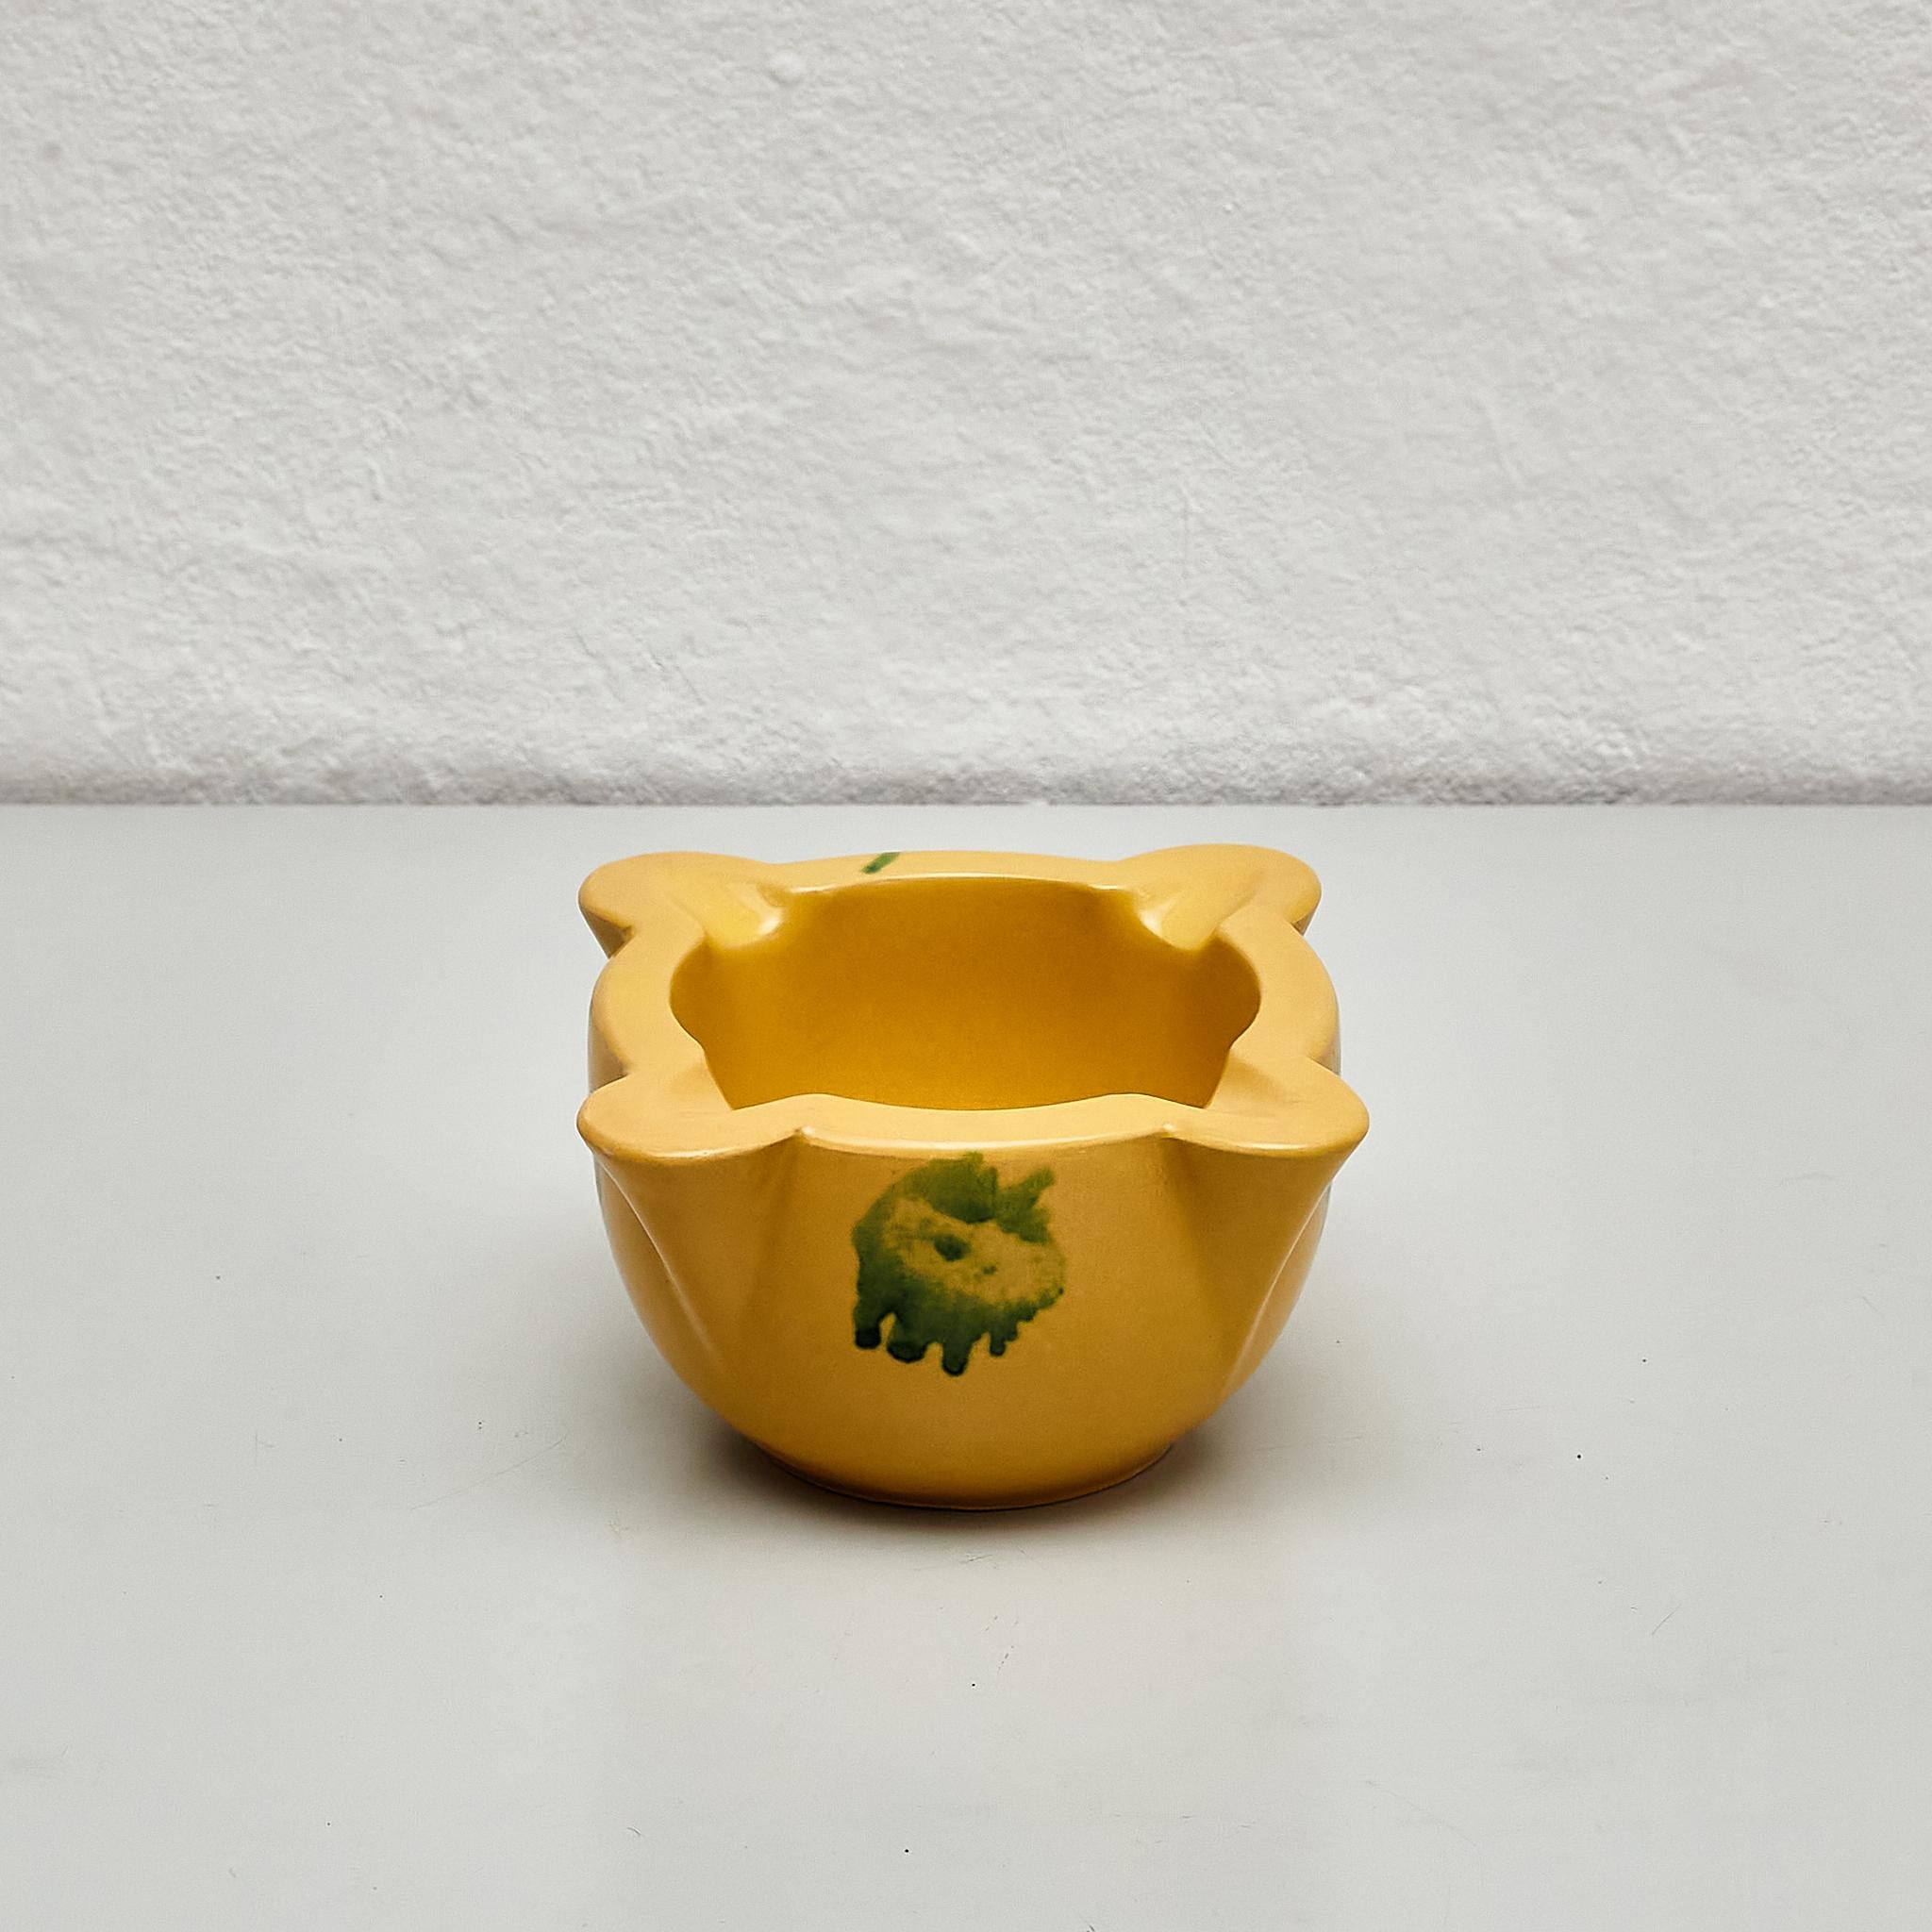 Antique vintage yellow ceramic mortar. 

Made by unknown manufacturer in Spain circa 1970.

In original condition, with minor wear consistent with age and use, preserving a beautiful patina.

Materials:
Ceramic